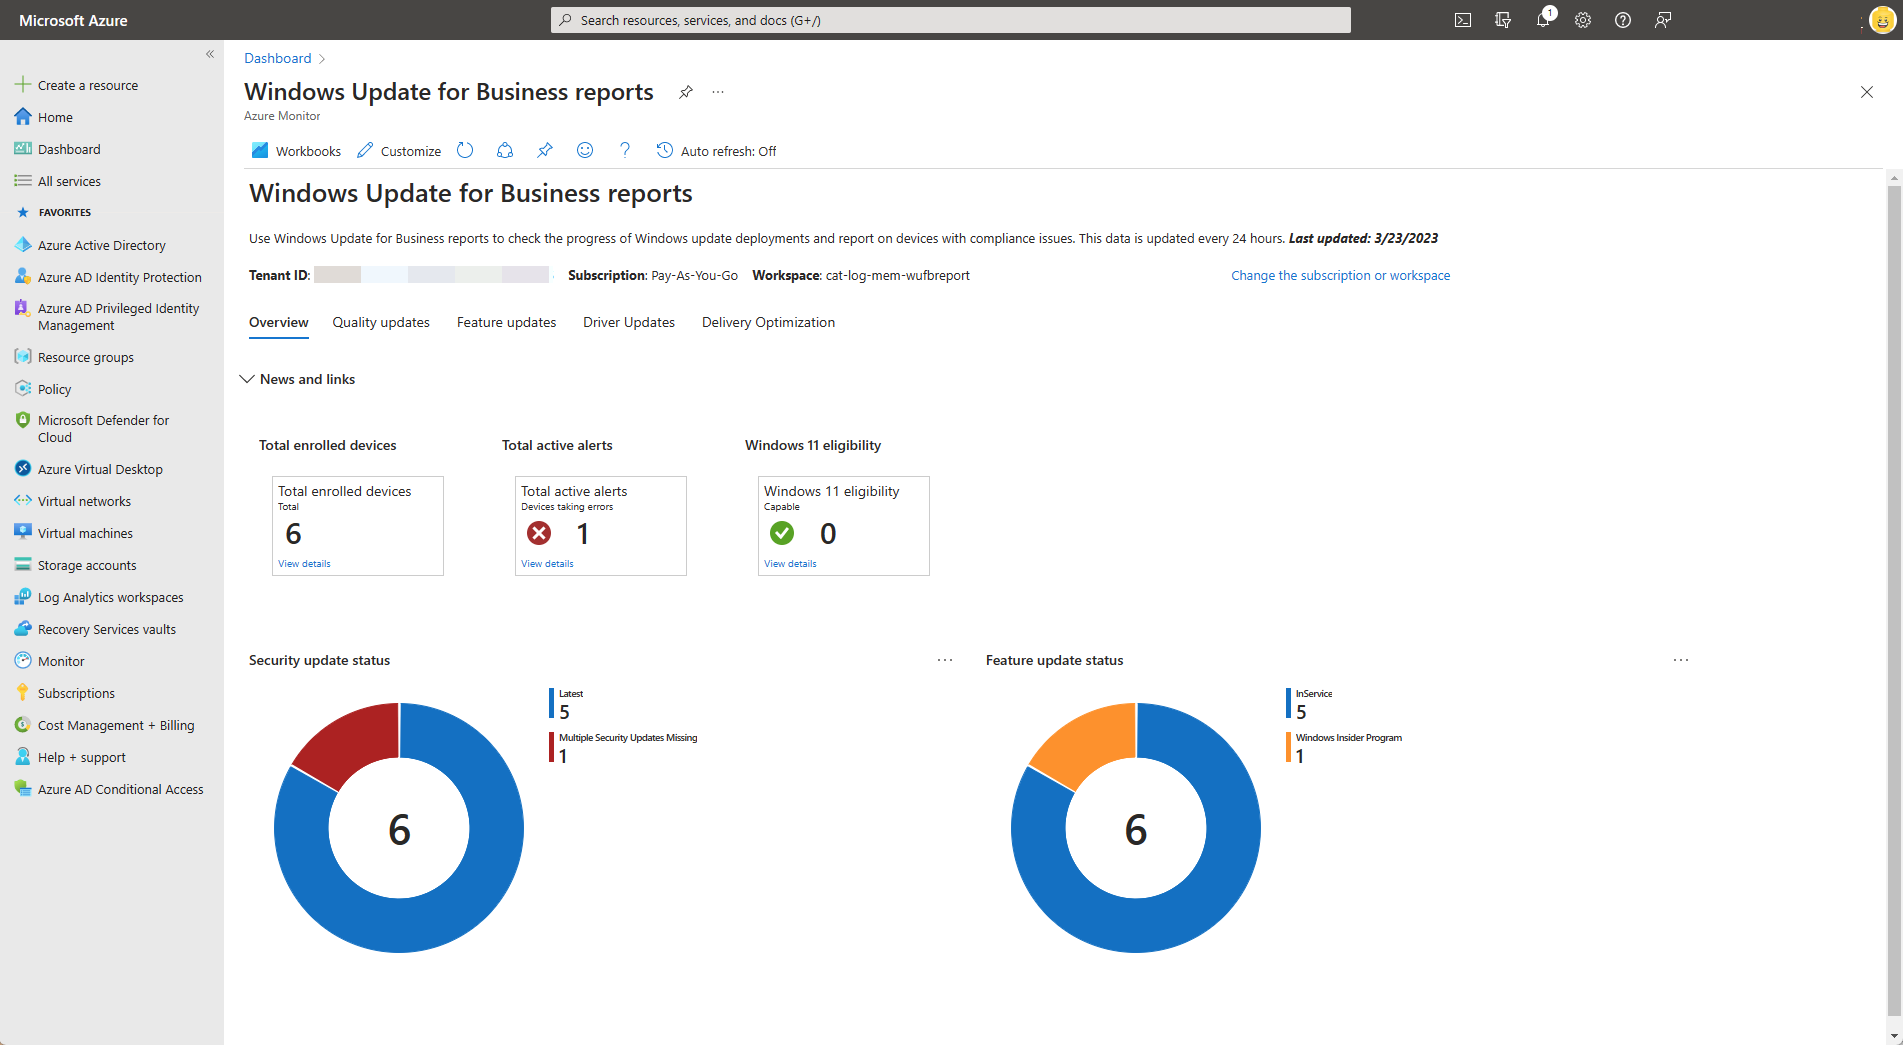 Enable Windows Update for Business Reports